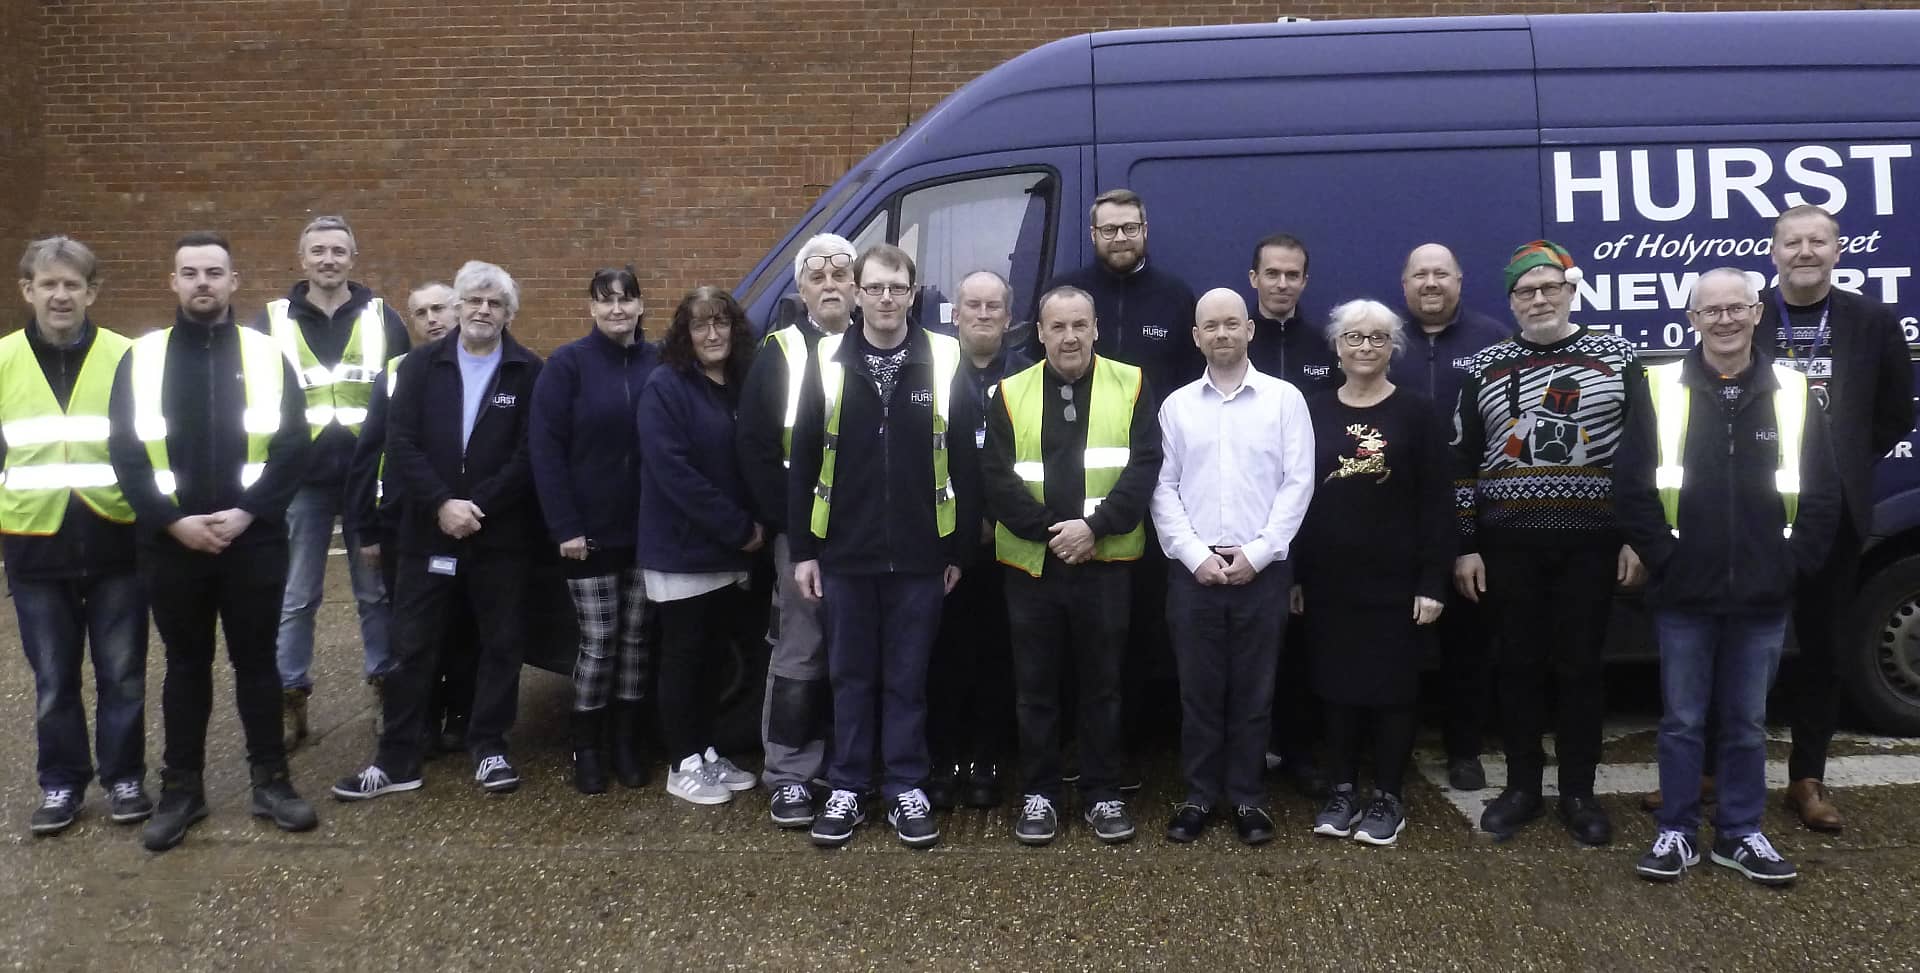 The Hurst team standing by the delivery van